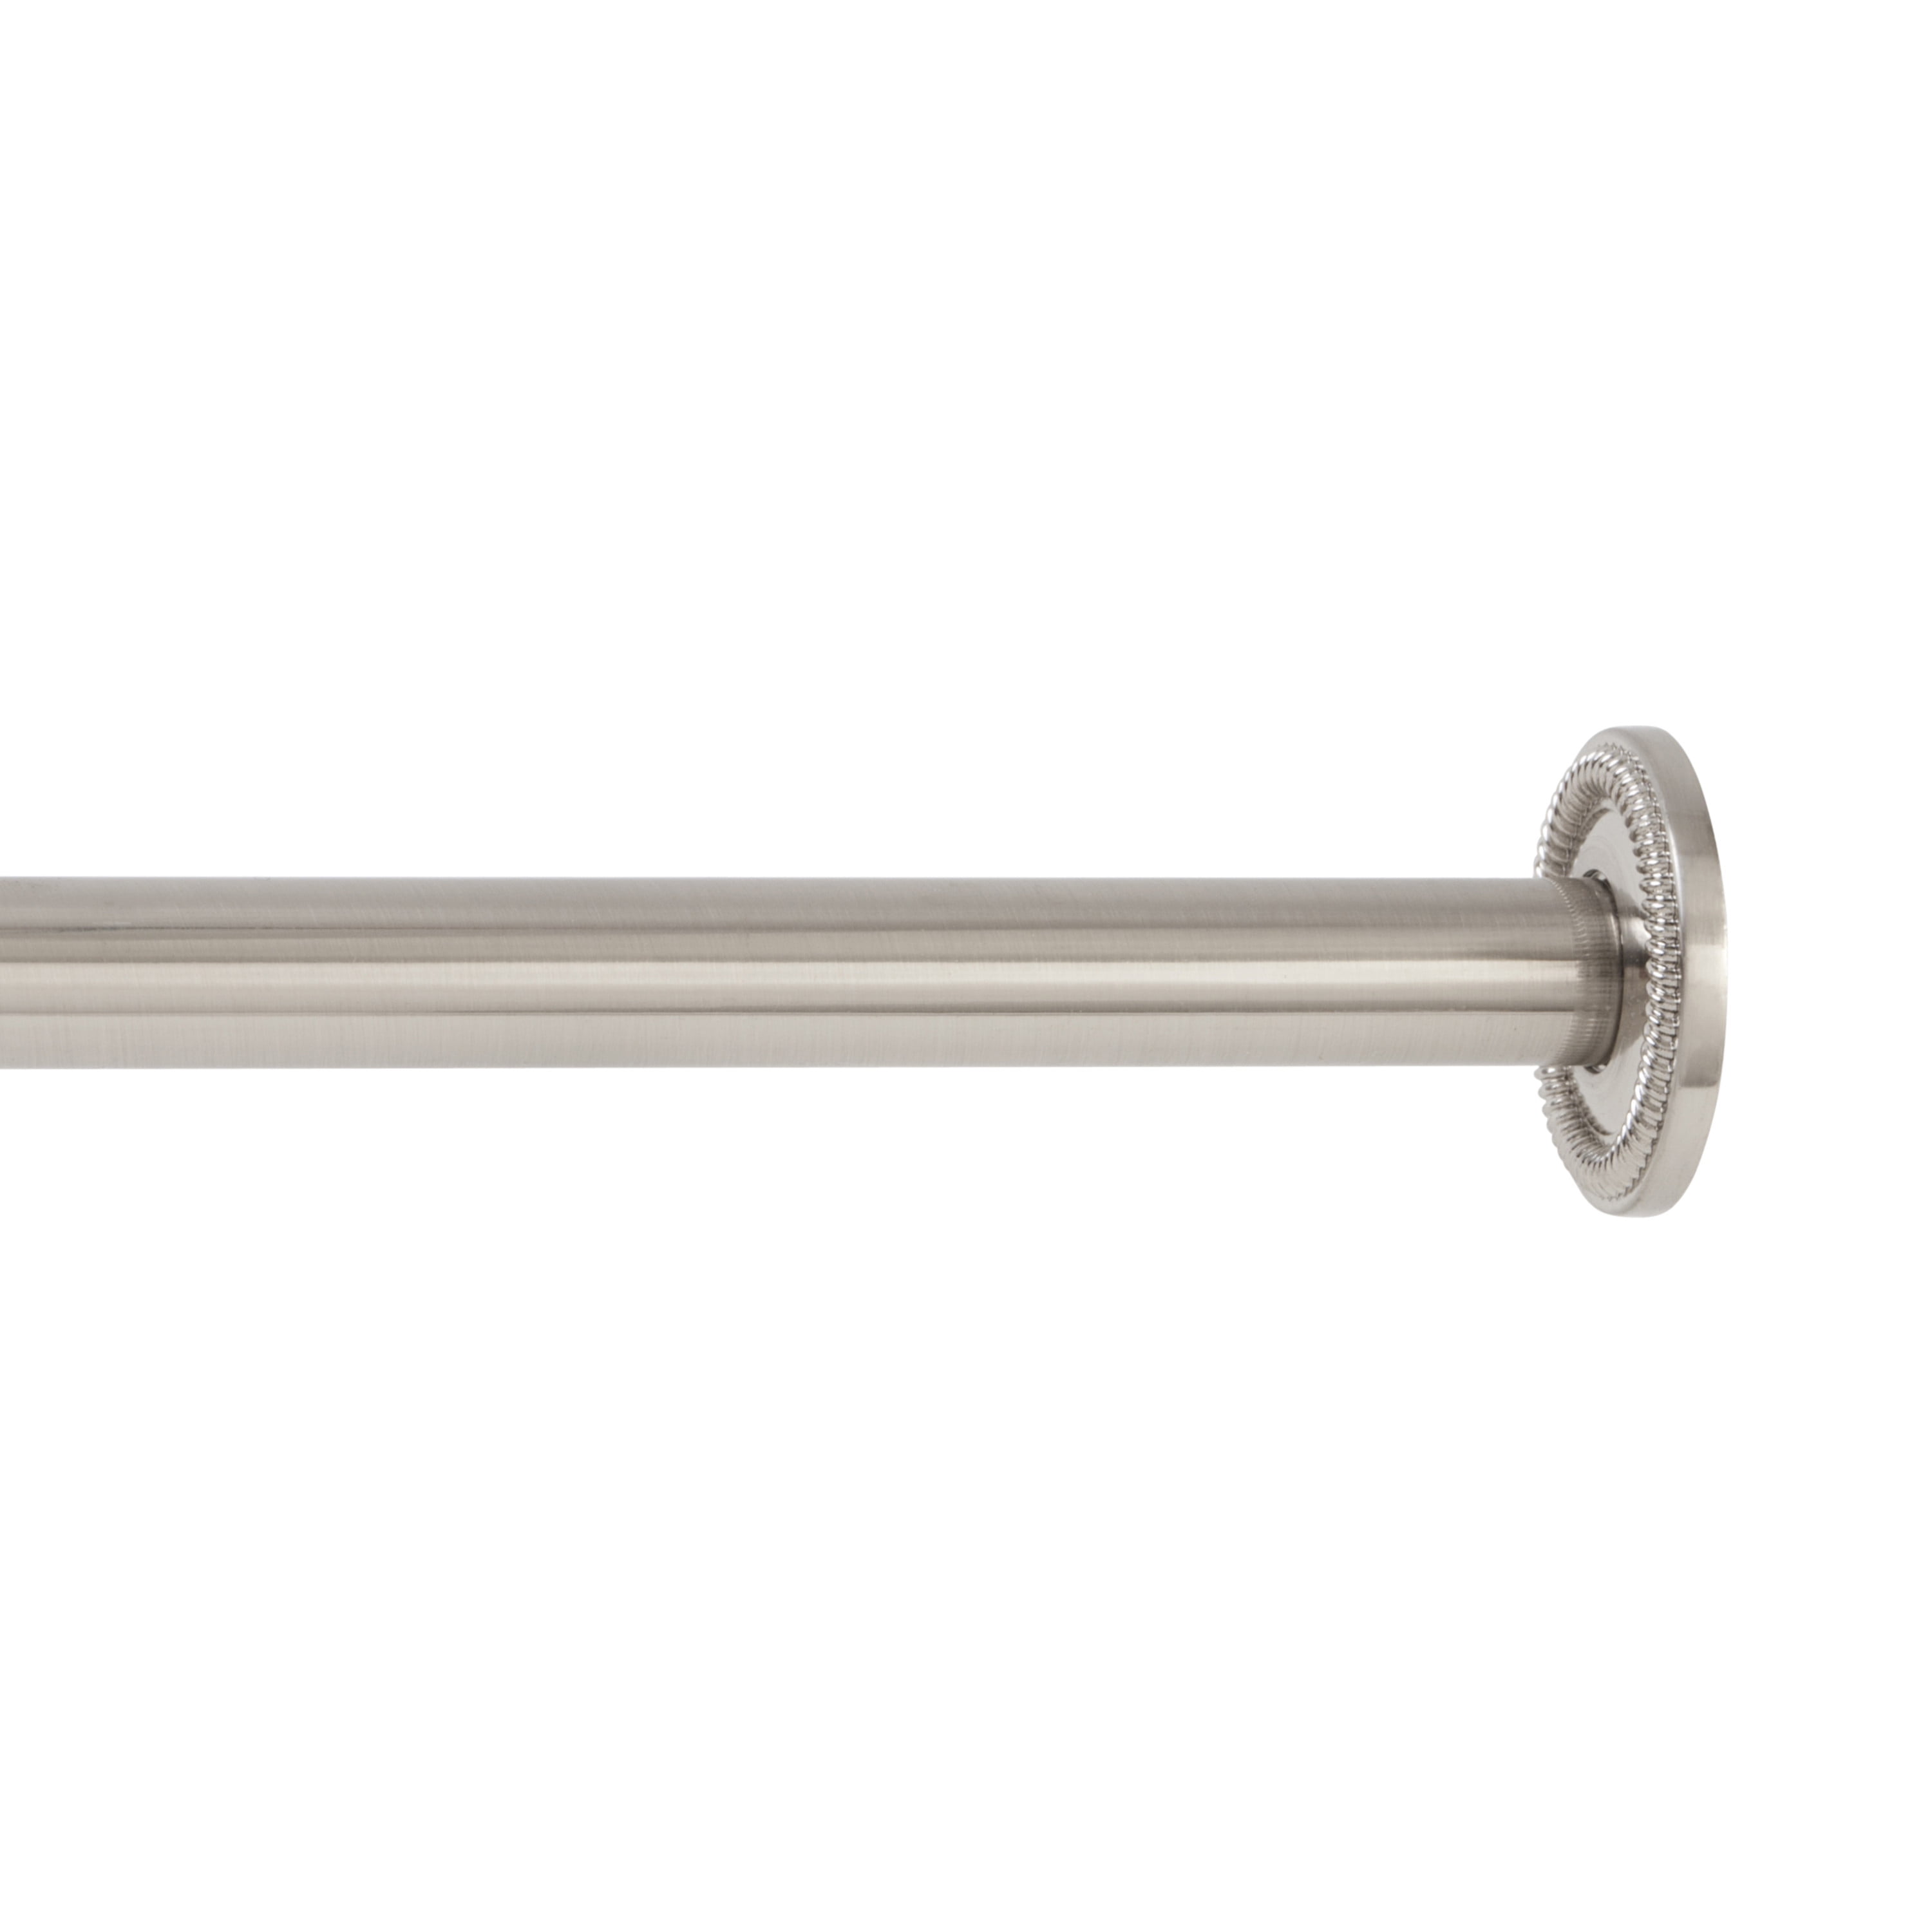 Mainstays 1 2 Brushed Nickel Tension, How To Fix A Tension Curtain Rod